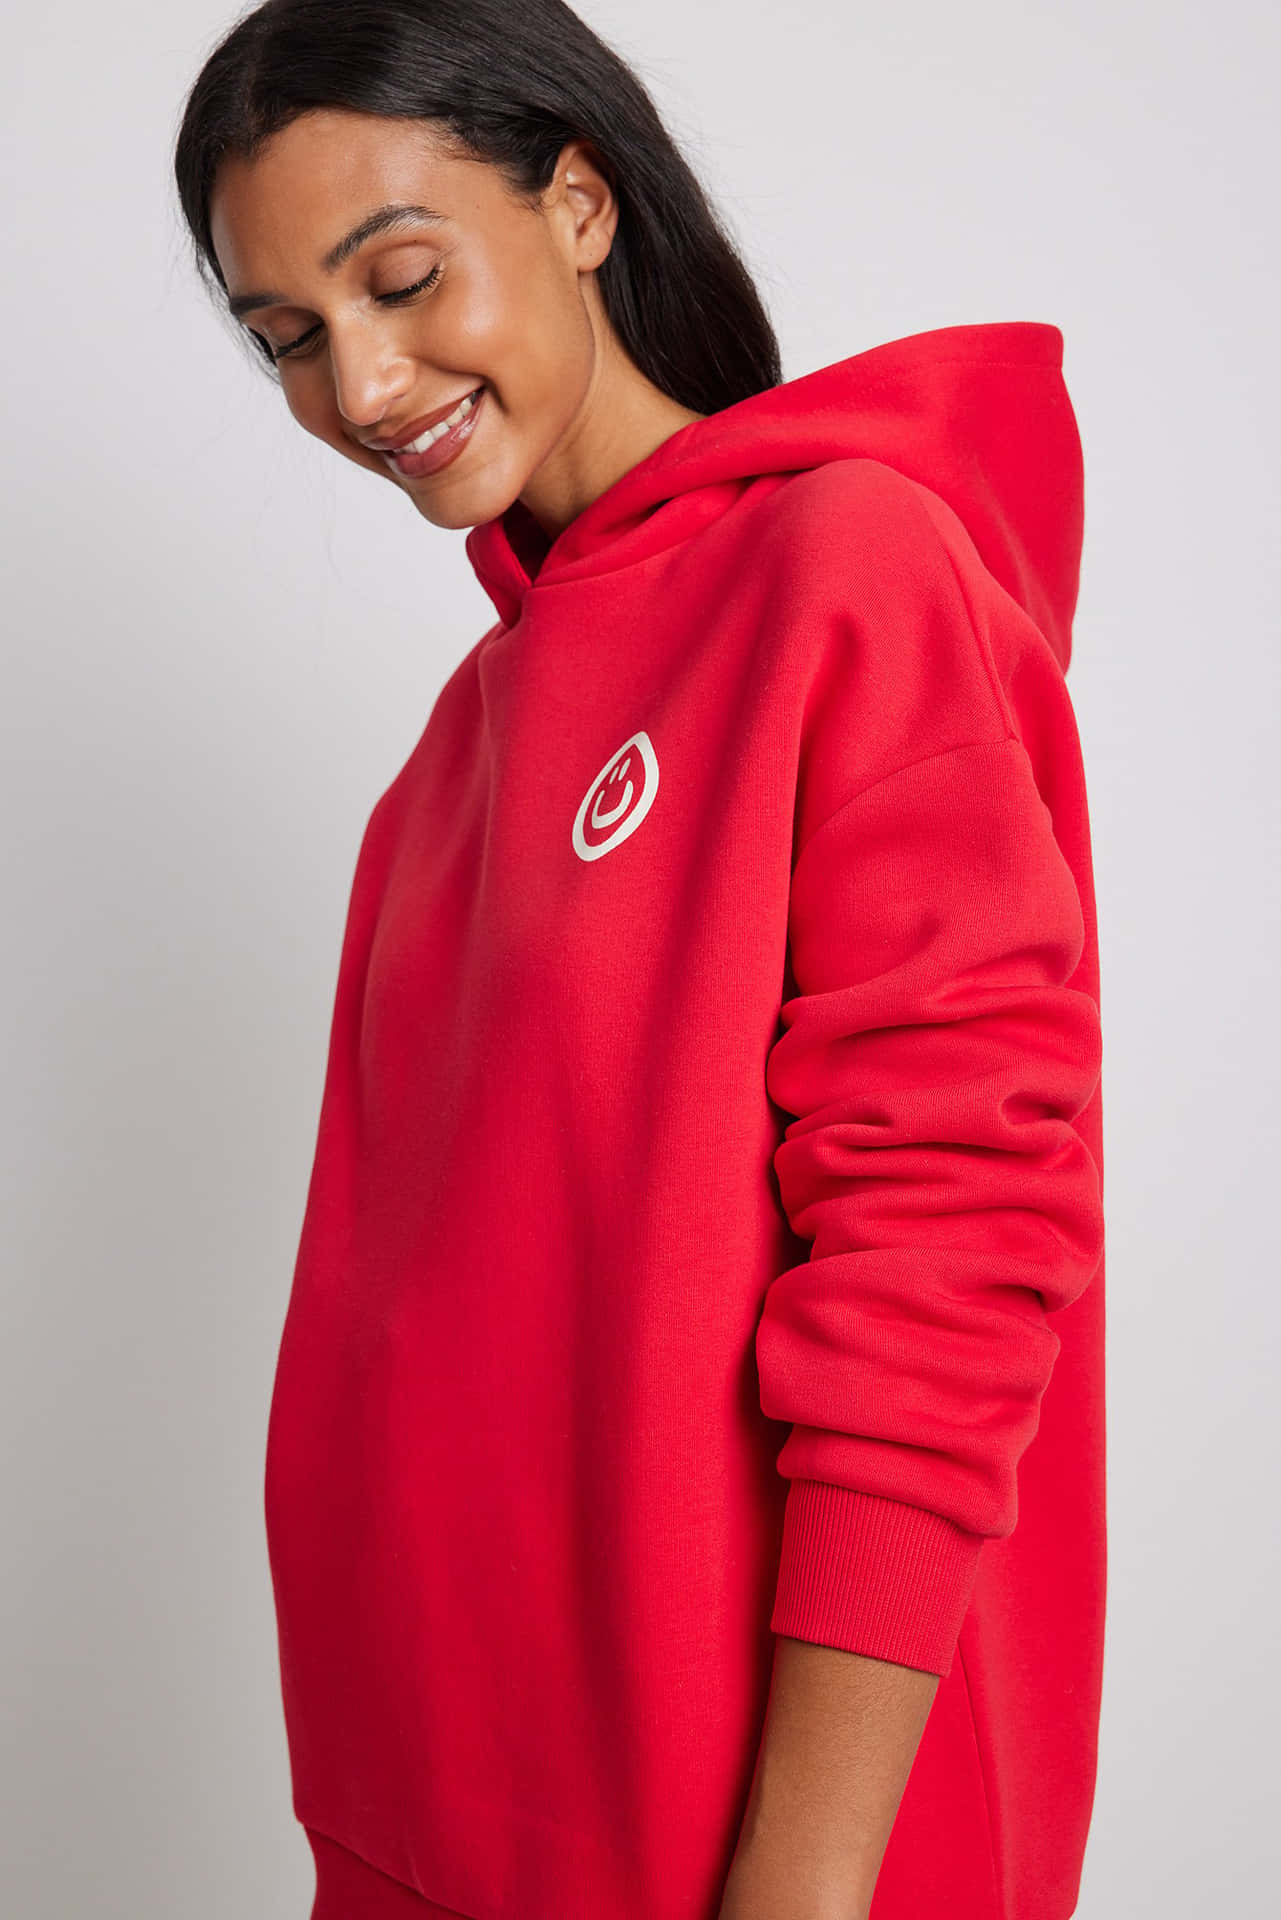 Stylish Red Hoodie Outfit Wallpaper